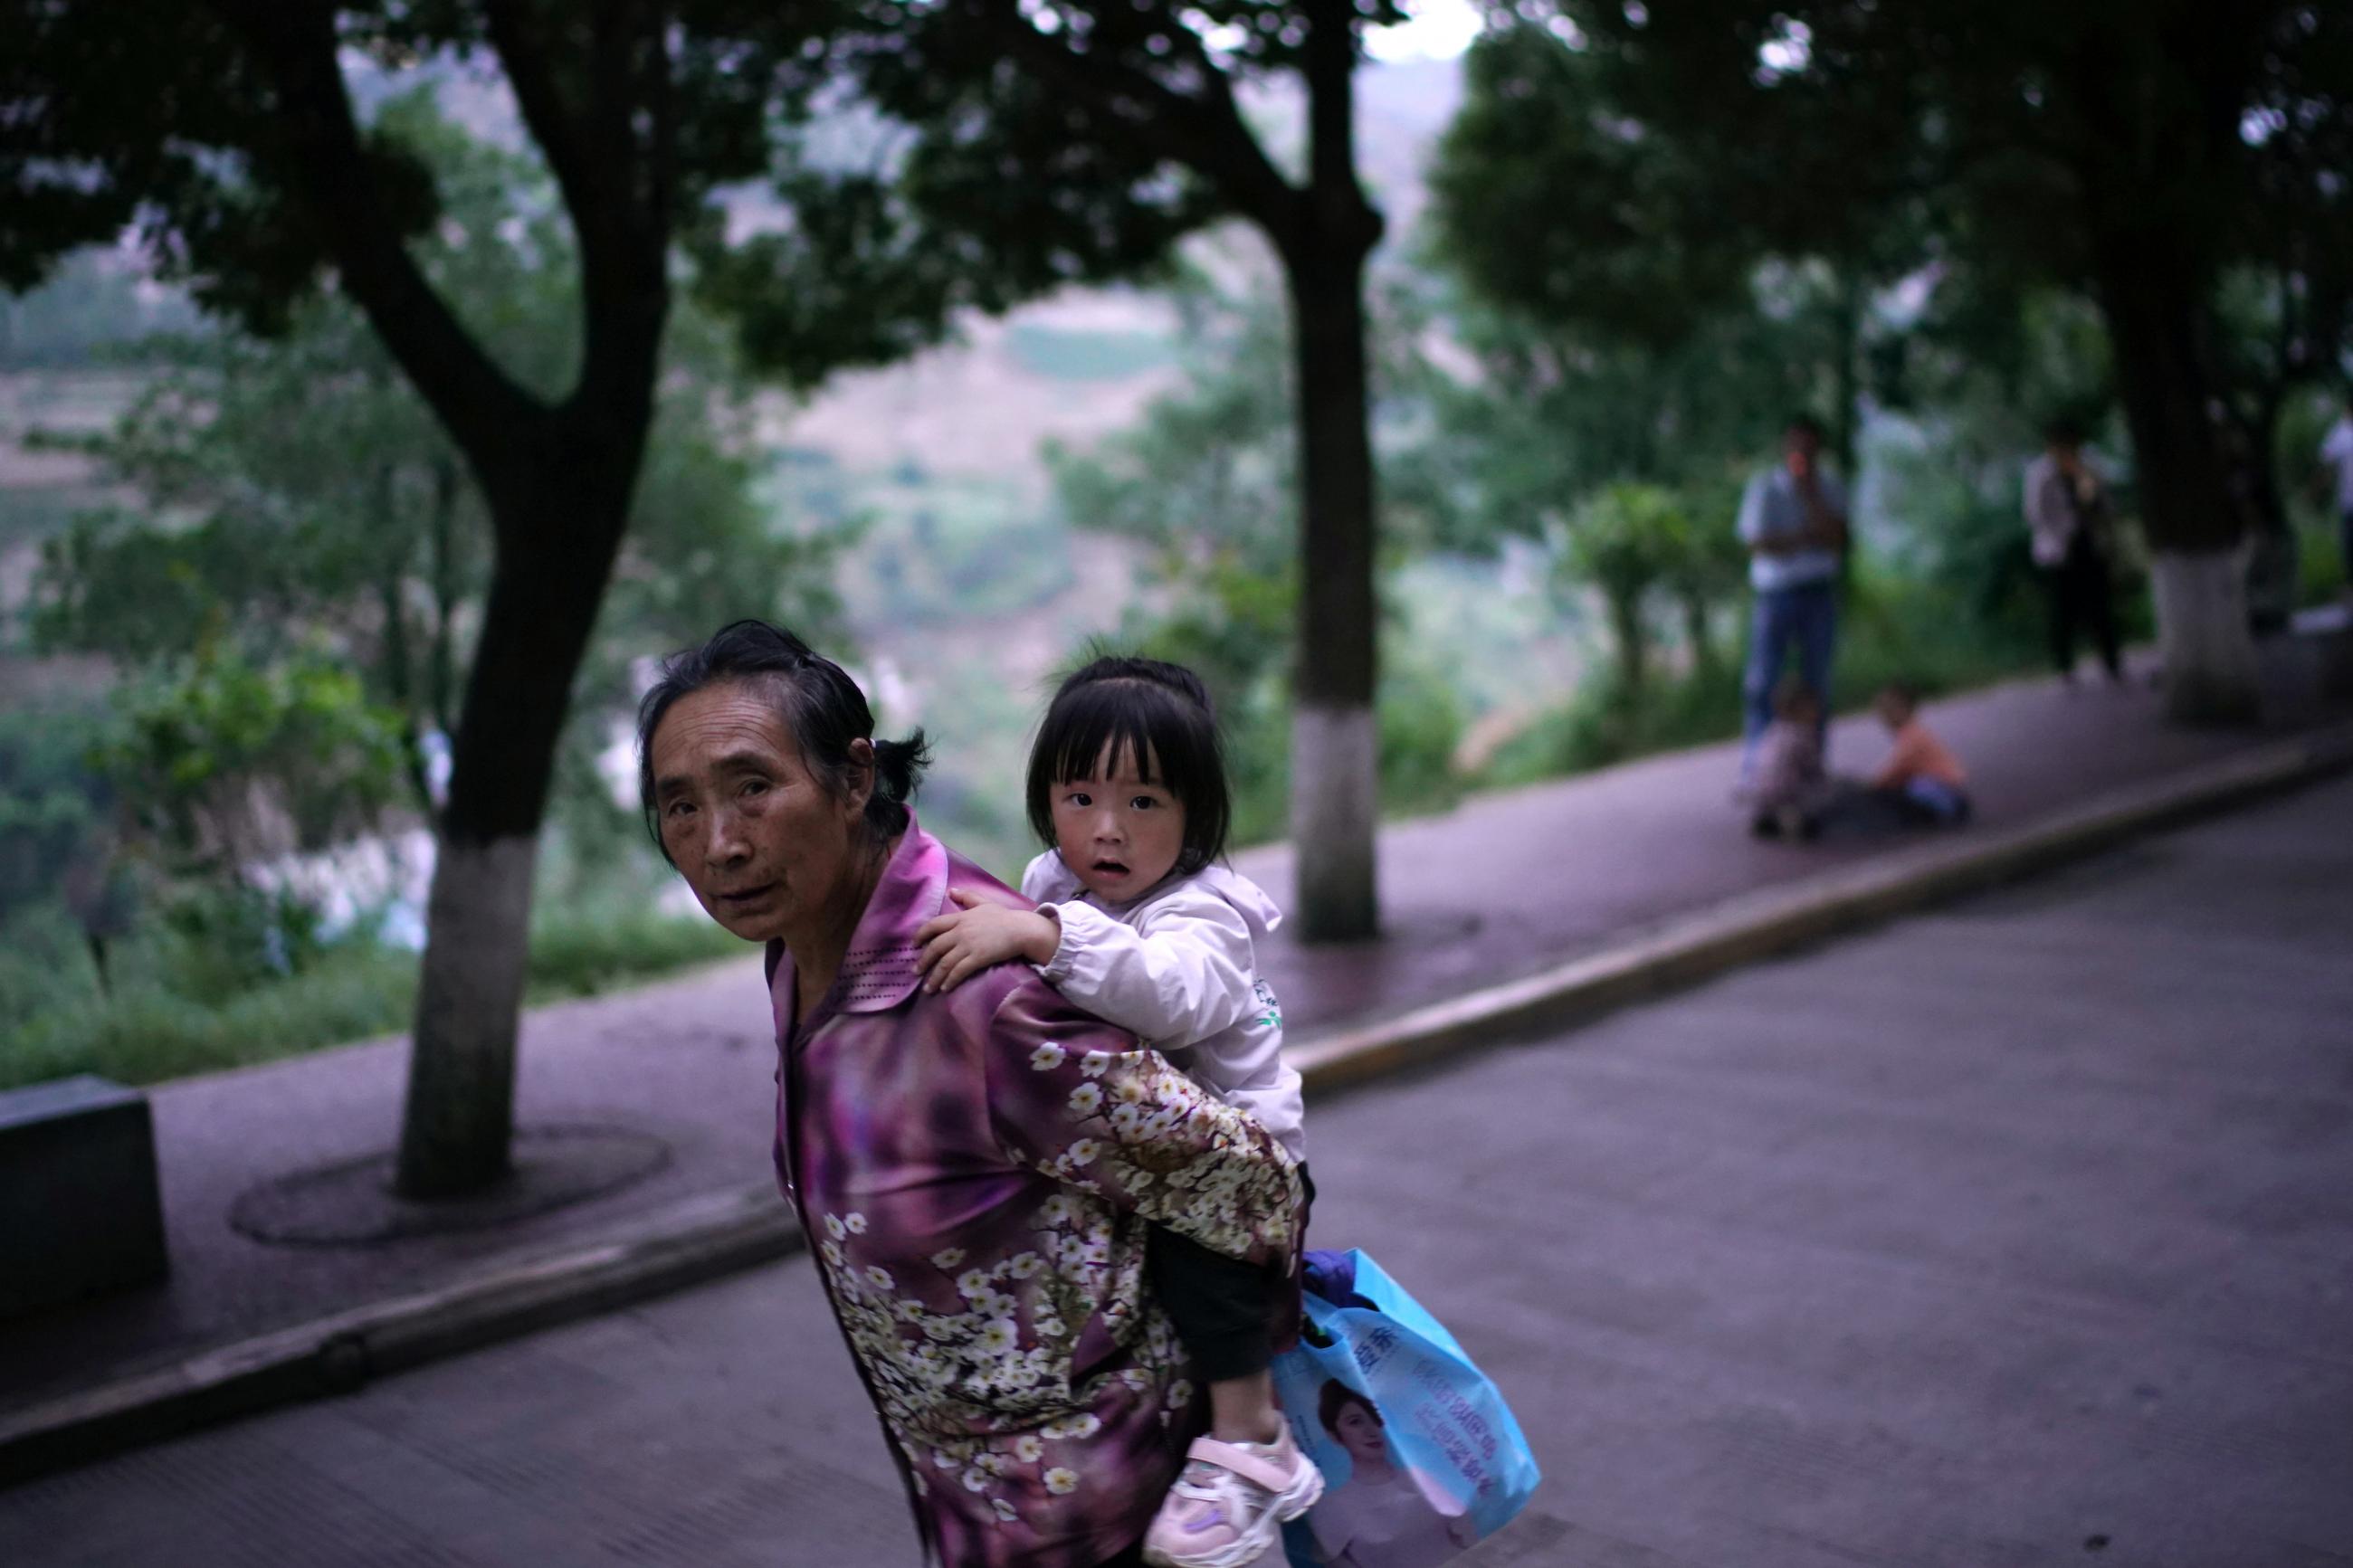 An elderly woman carrying a young girl on her back walks on a street in Ganluo county, Liangshan Yi Autonomous Prefecture, Sichuan province, China on September 9, 2020. 